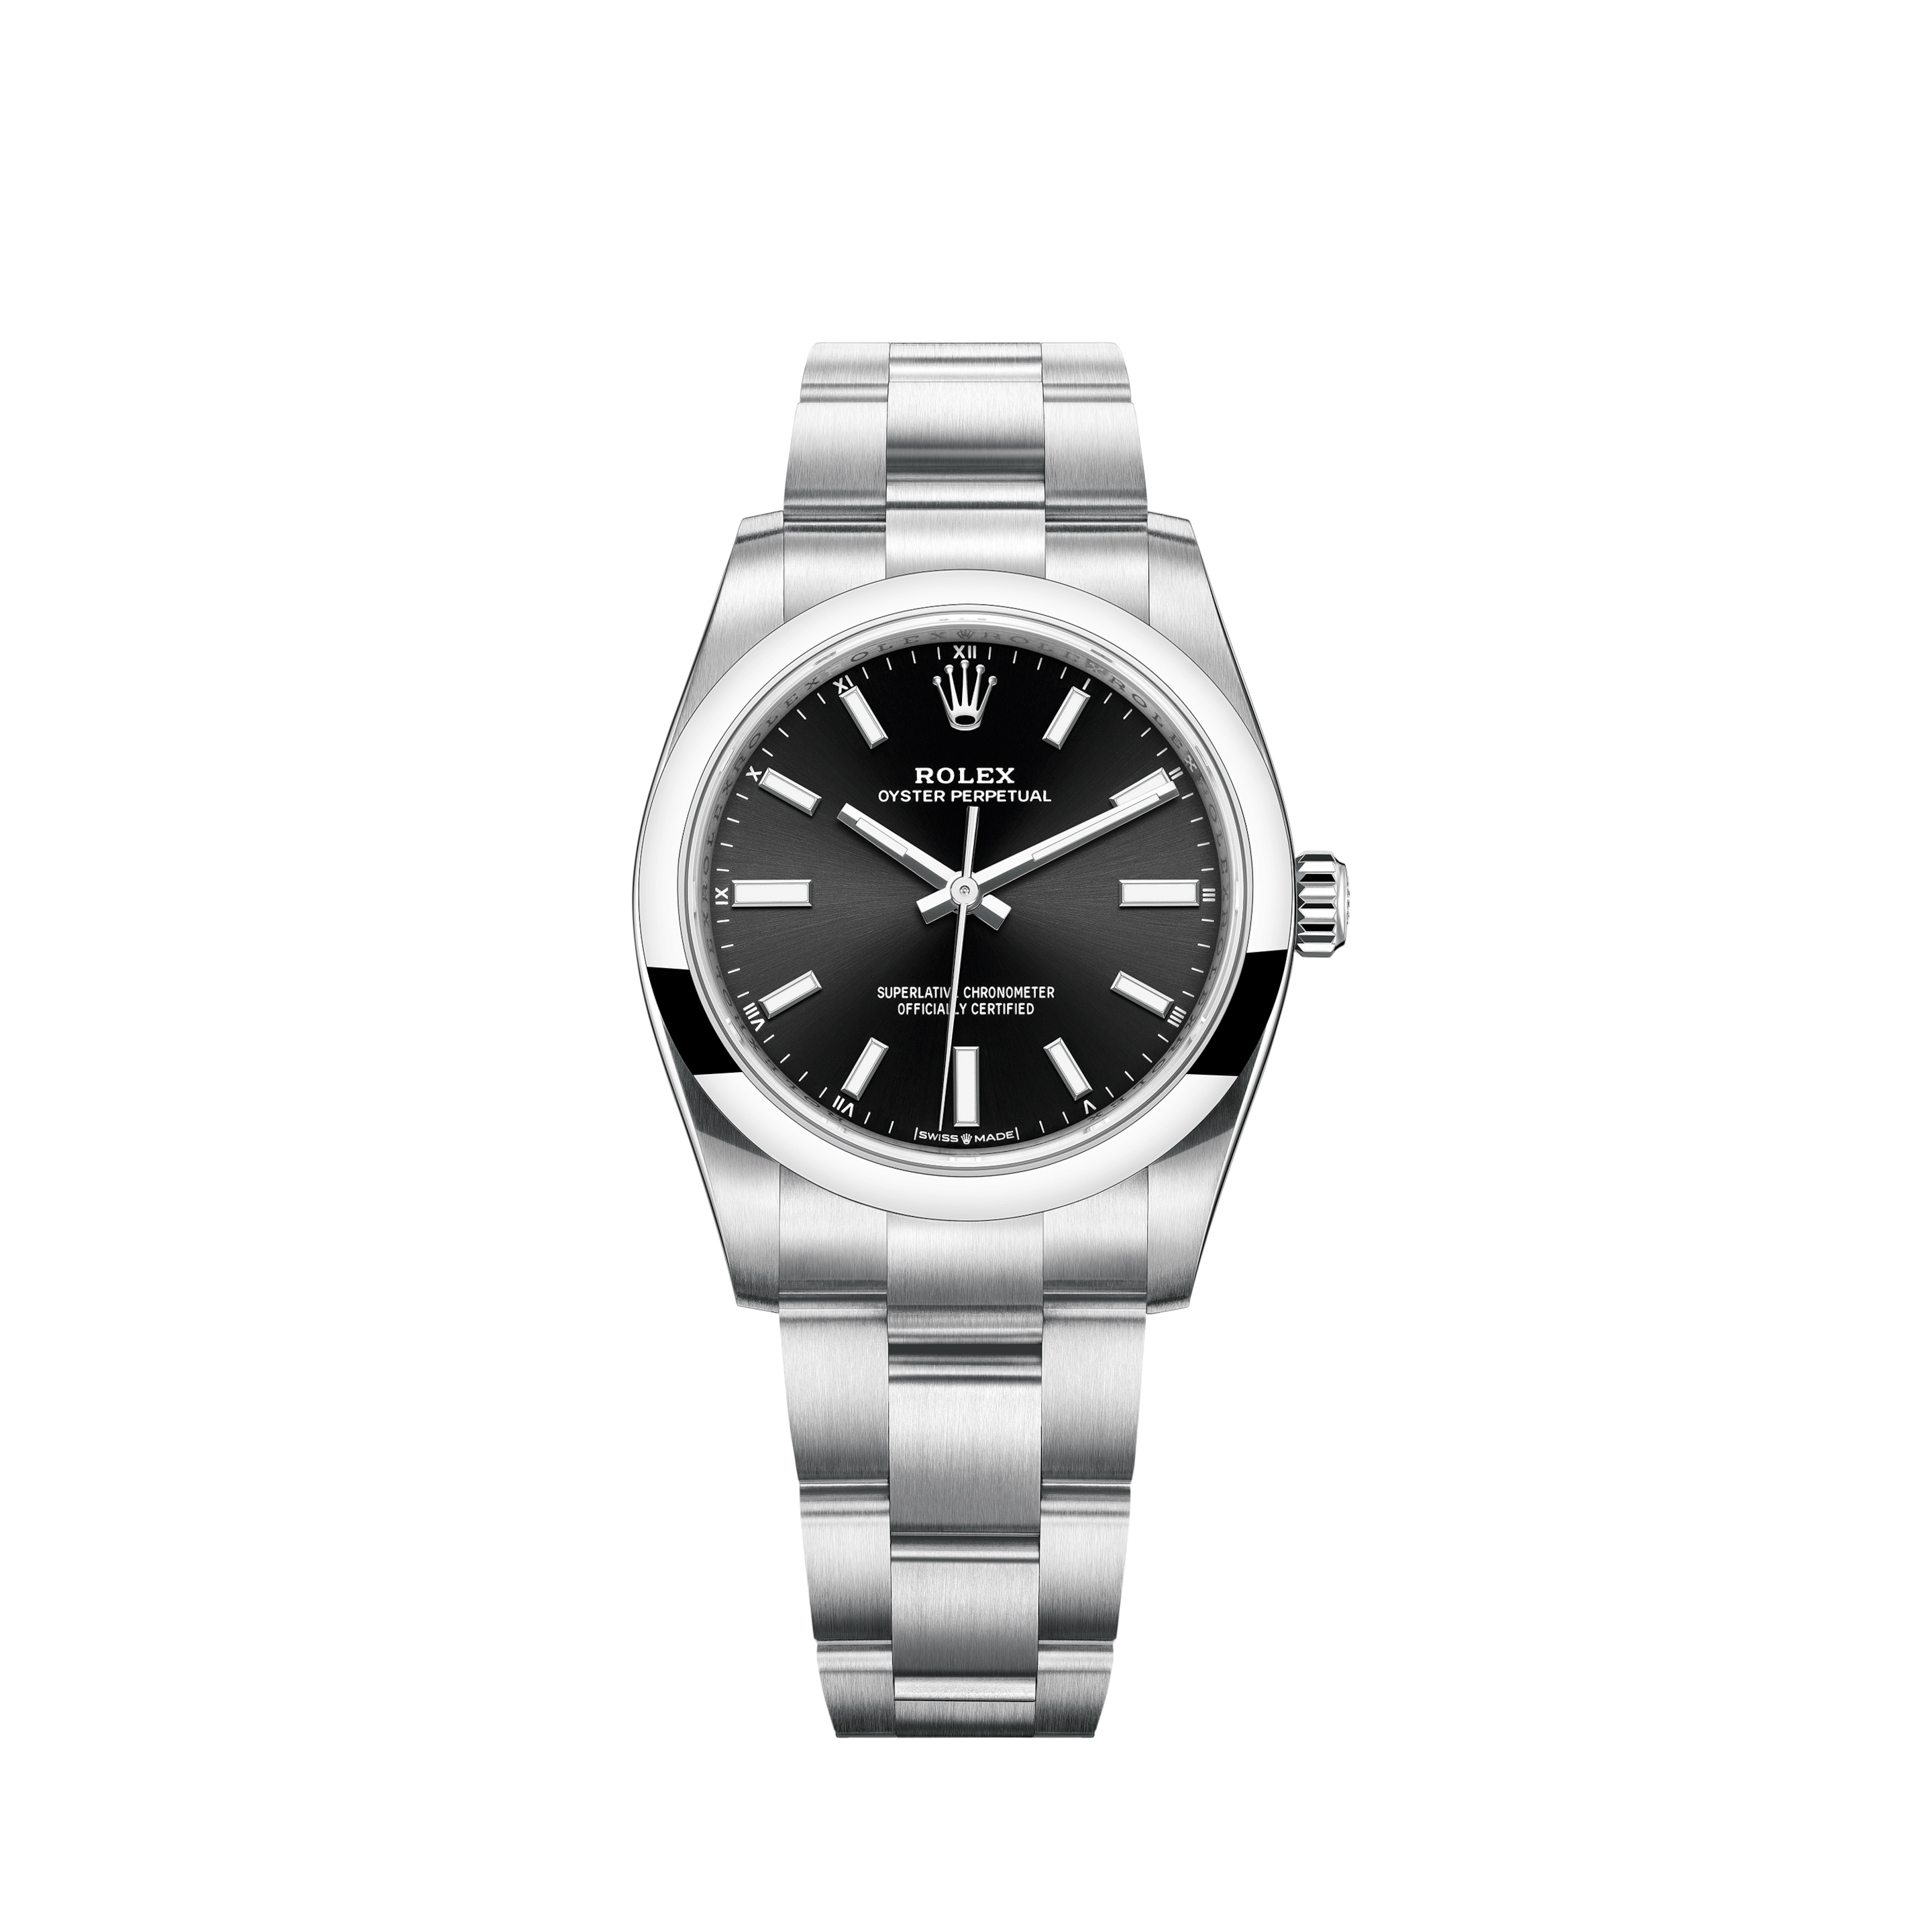 Rolex Oyster Perpetual 114300 Box and Papers 2019Rolex Oyster Perpetual 114300 Drso Dark Rhodium Dial 39mm MINT